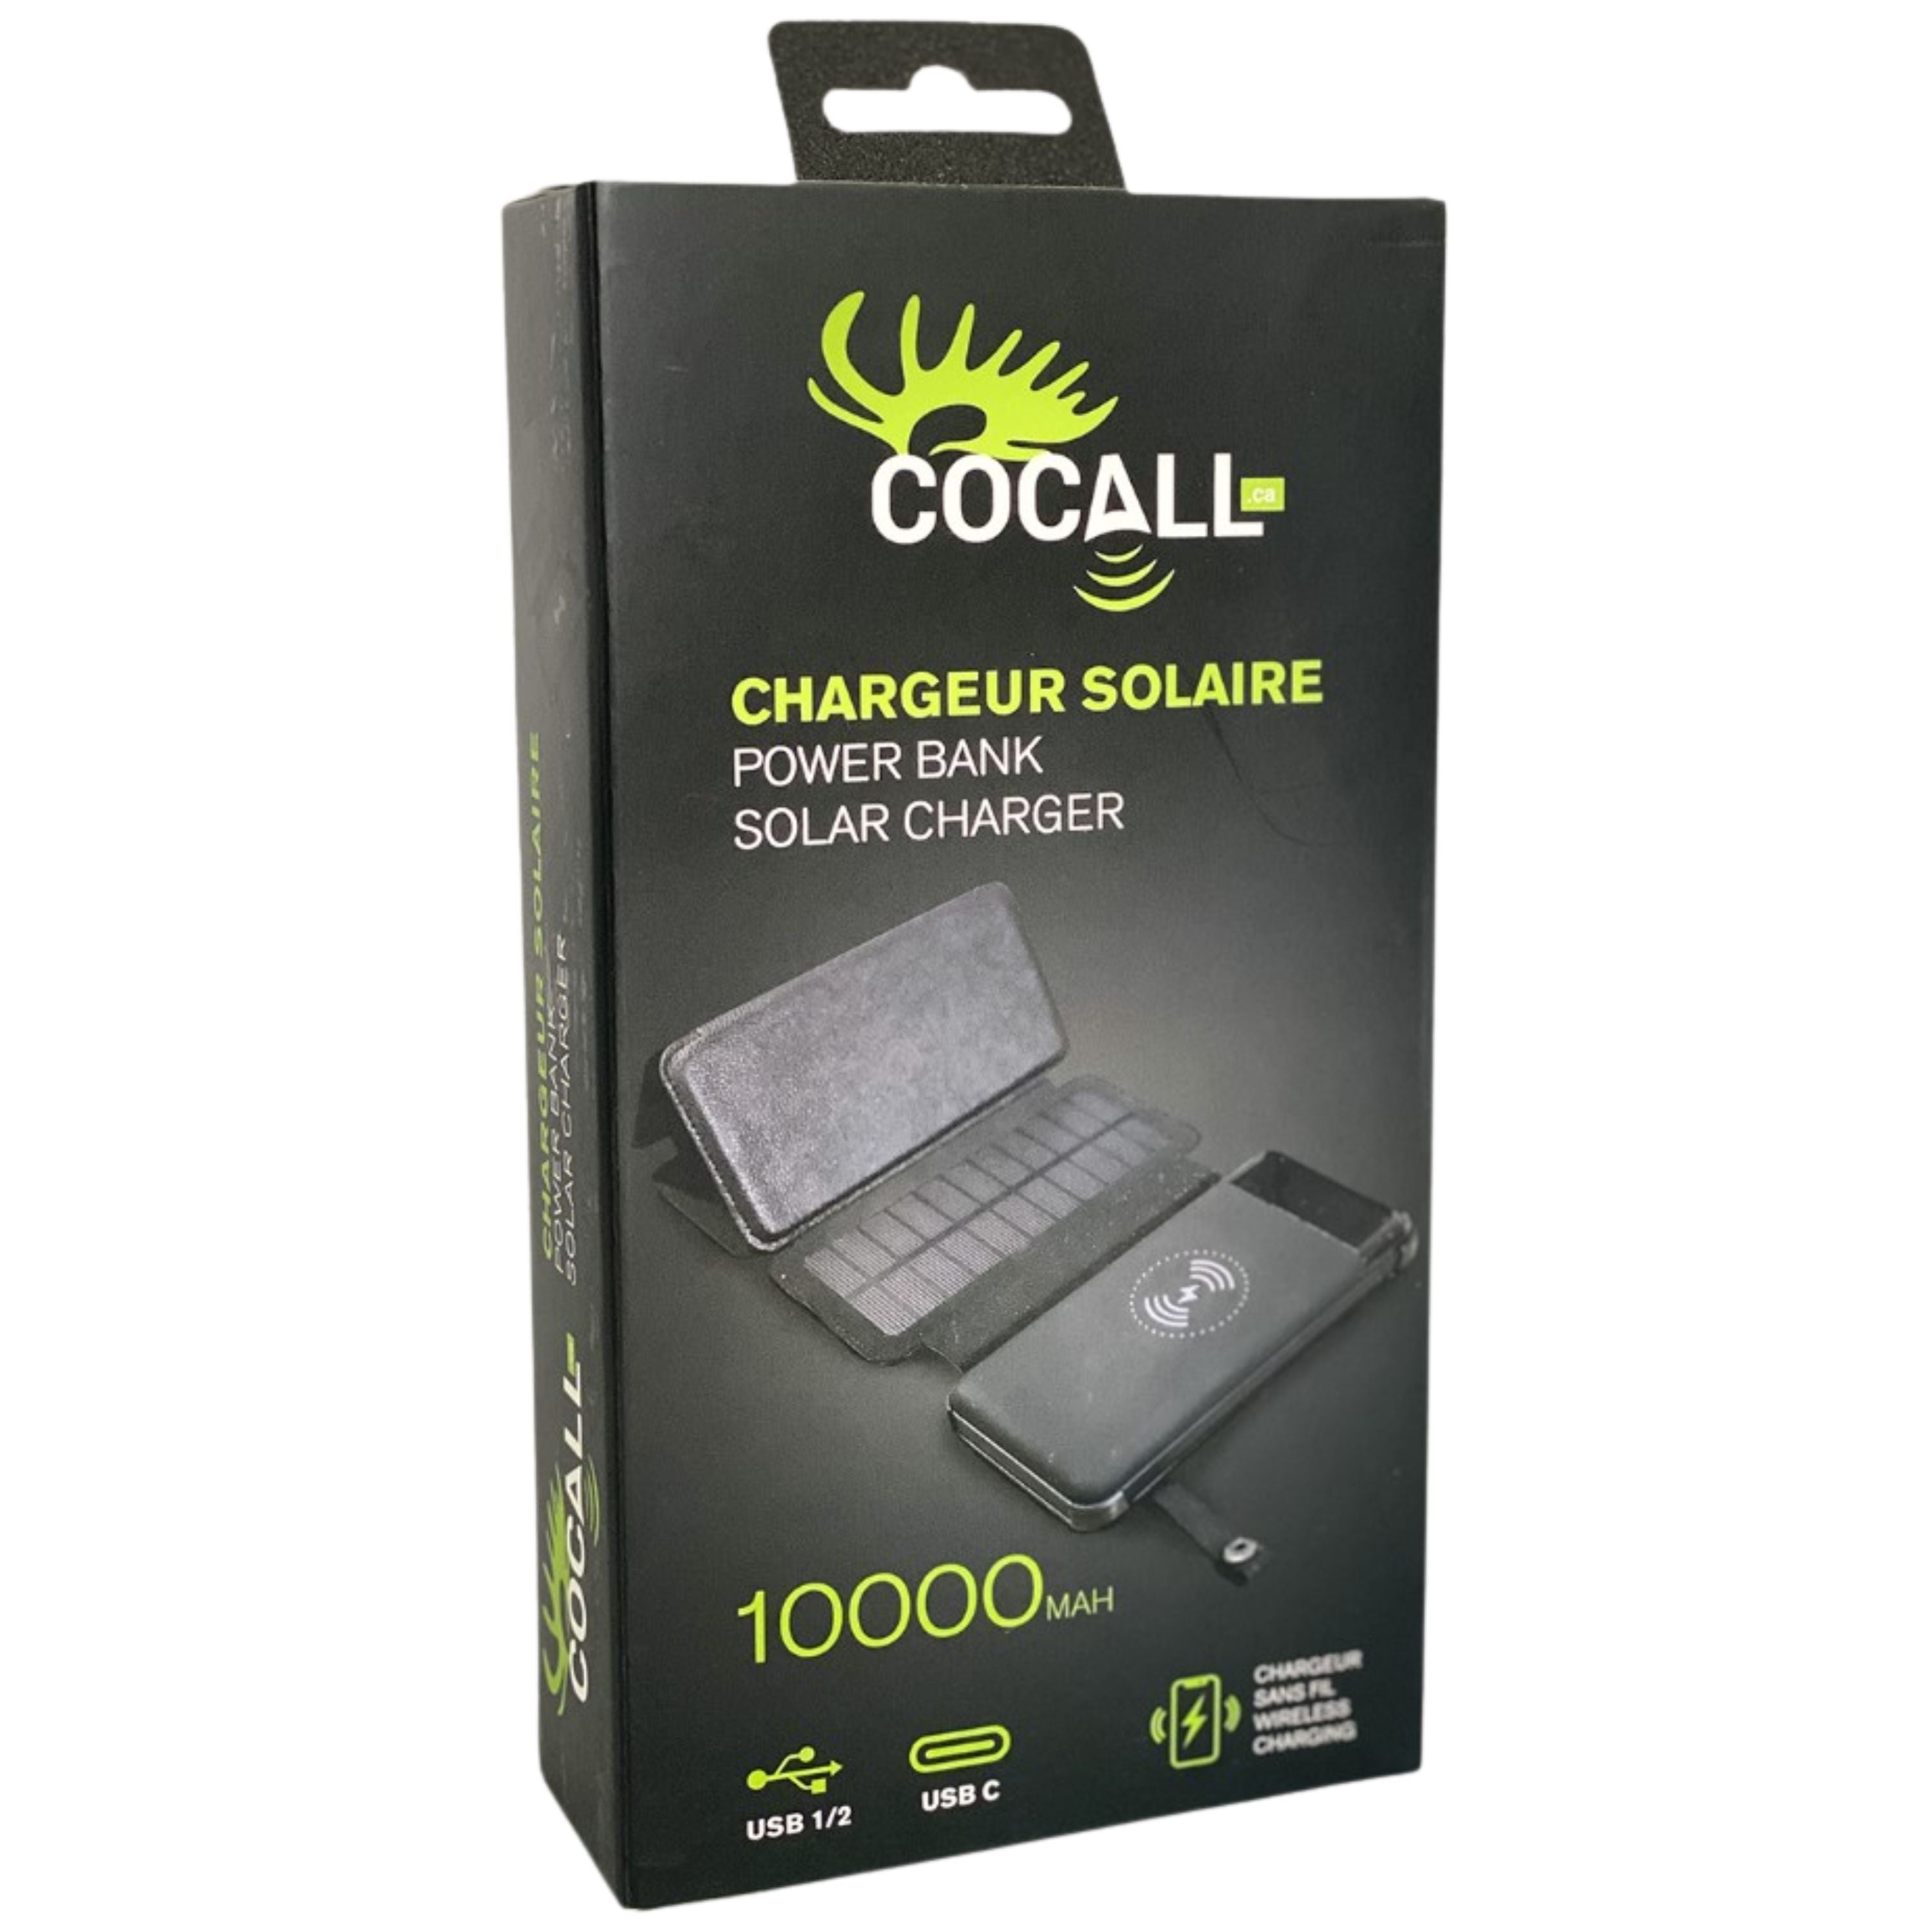 Chargeur solaire portatif pour Cocall||Portable solar charger for Cocall